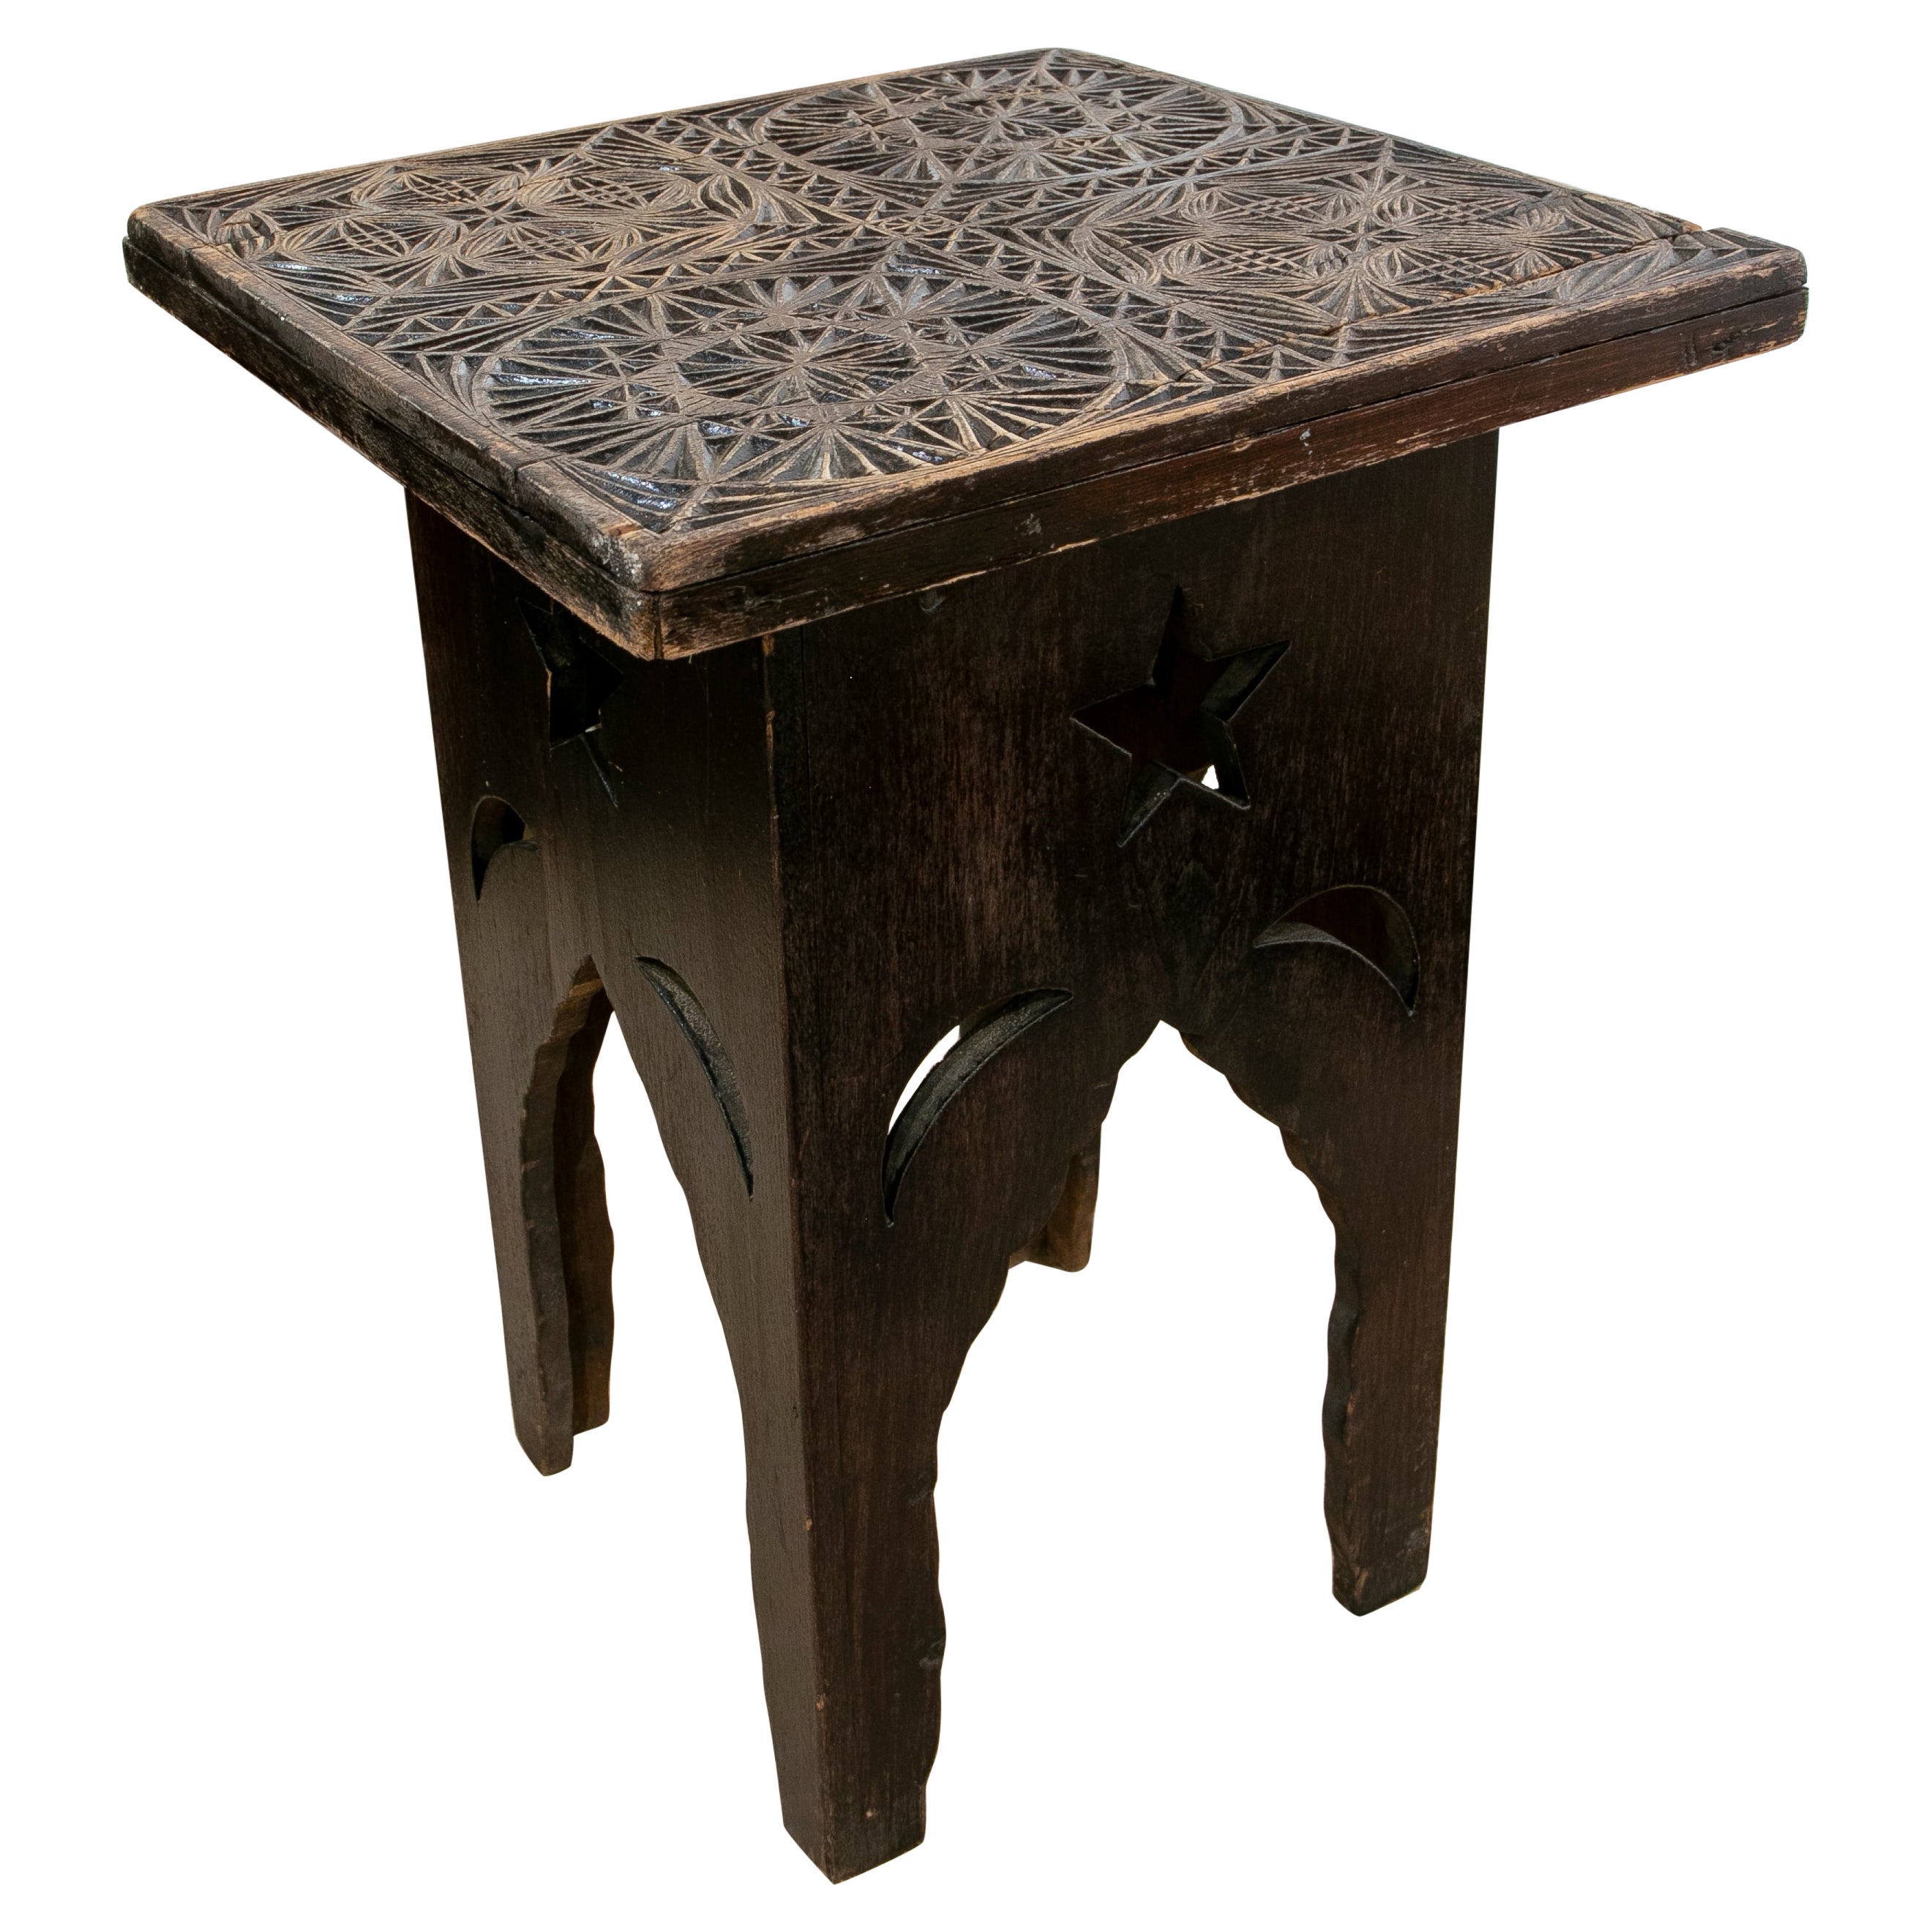 Wooden Side Table with Hand-Carved Top with Moulds for Making Fabrics